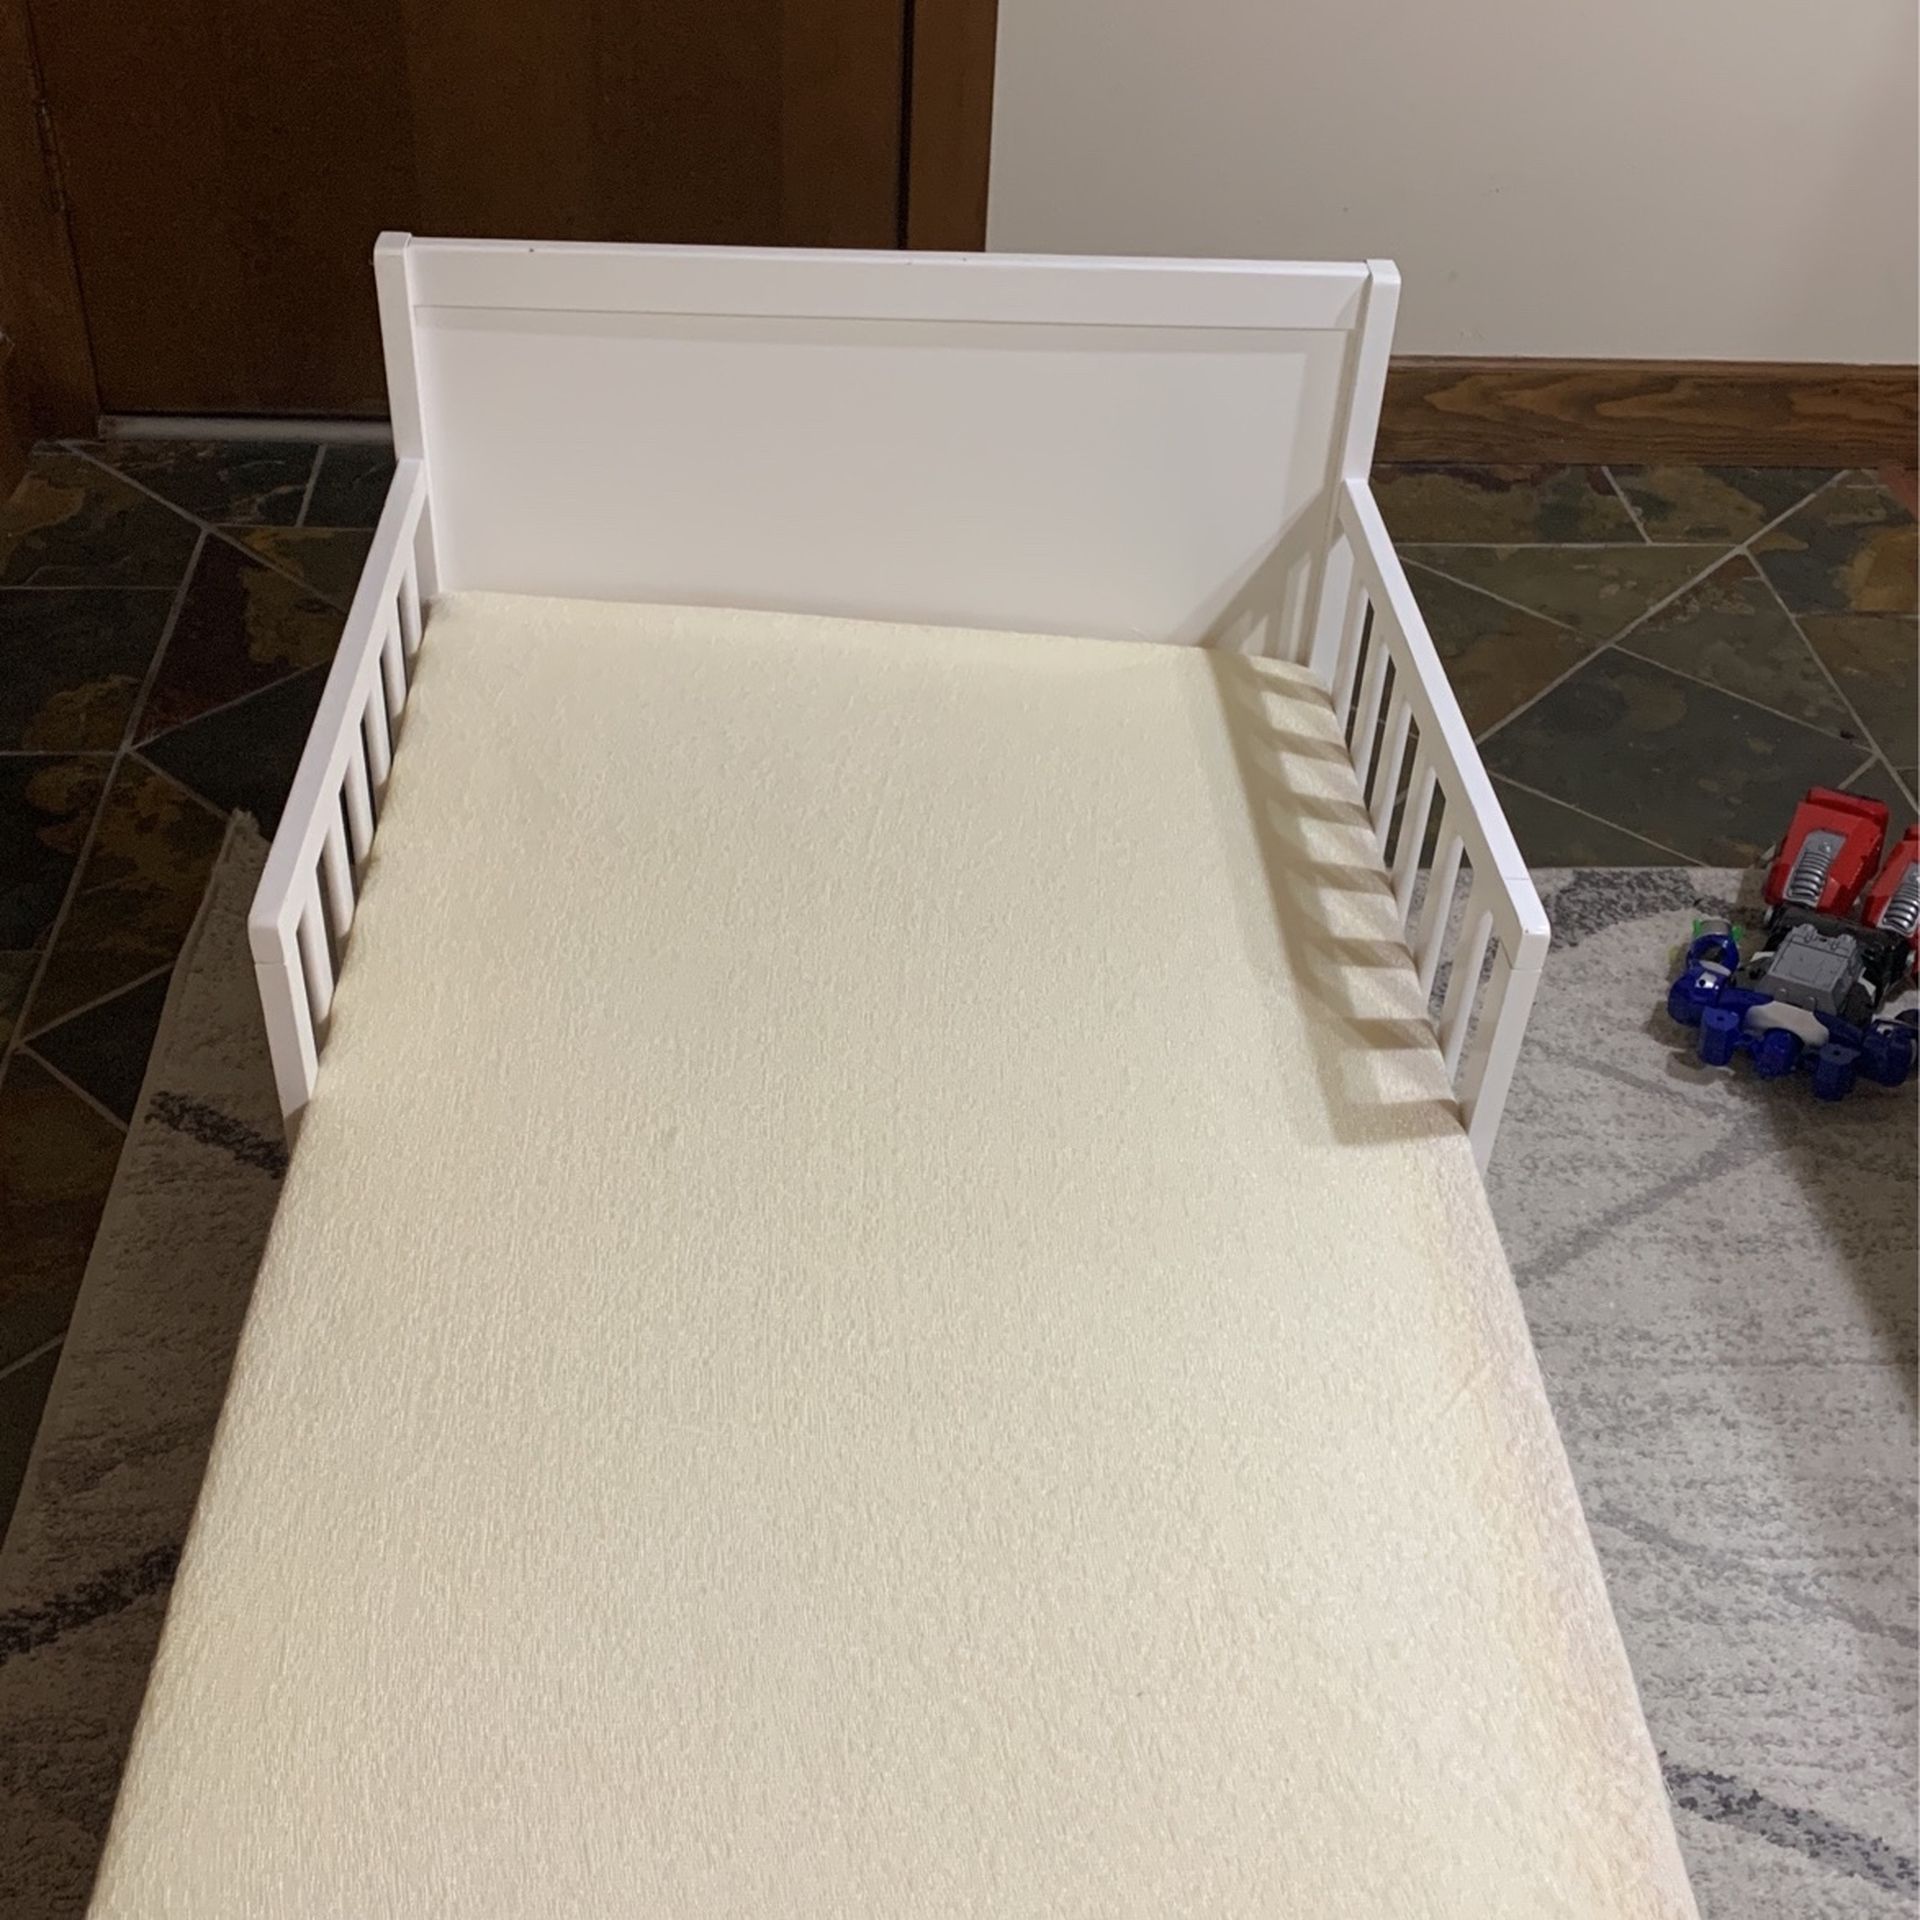 Toddler Bed ***PENDING PICK UP***